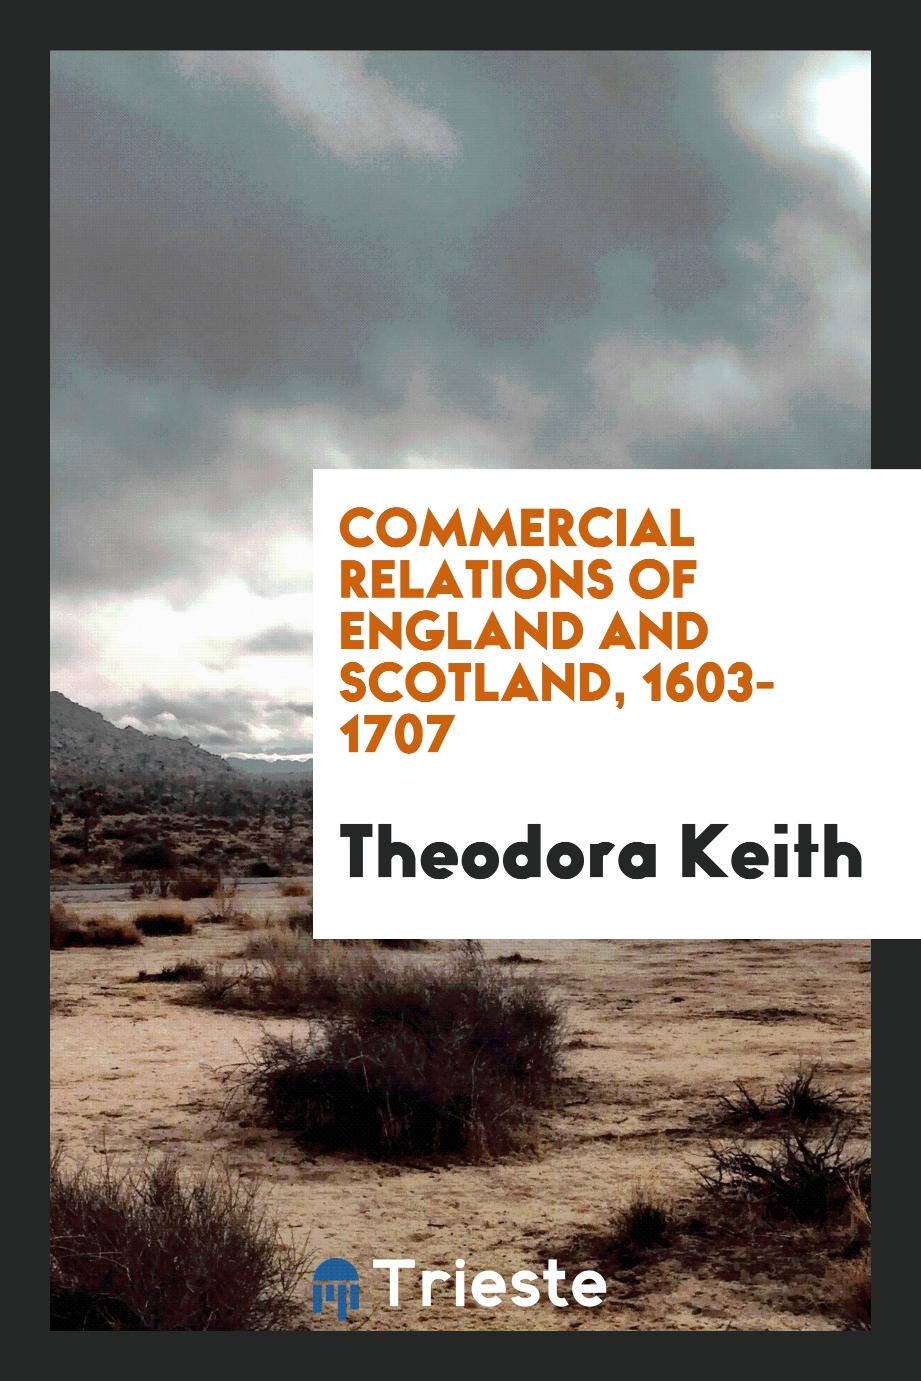 Theodora Keith - Commercial relations of England and Scotland, 1603-1707